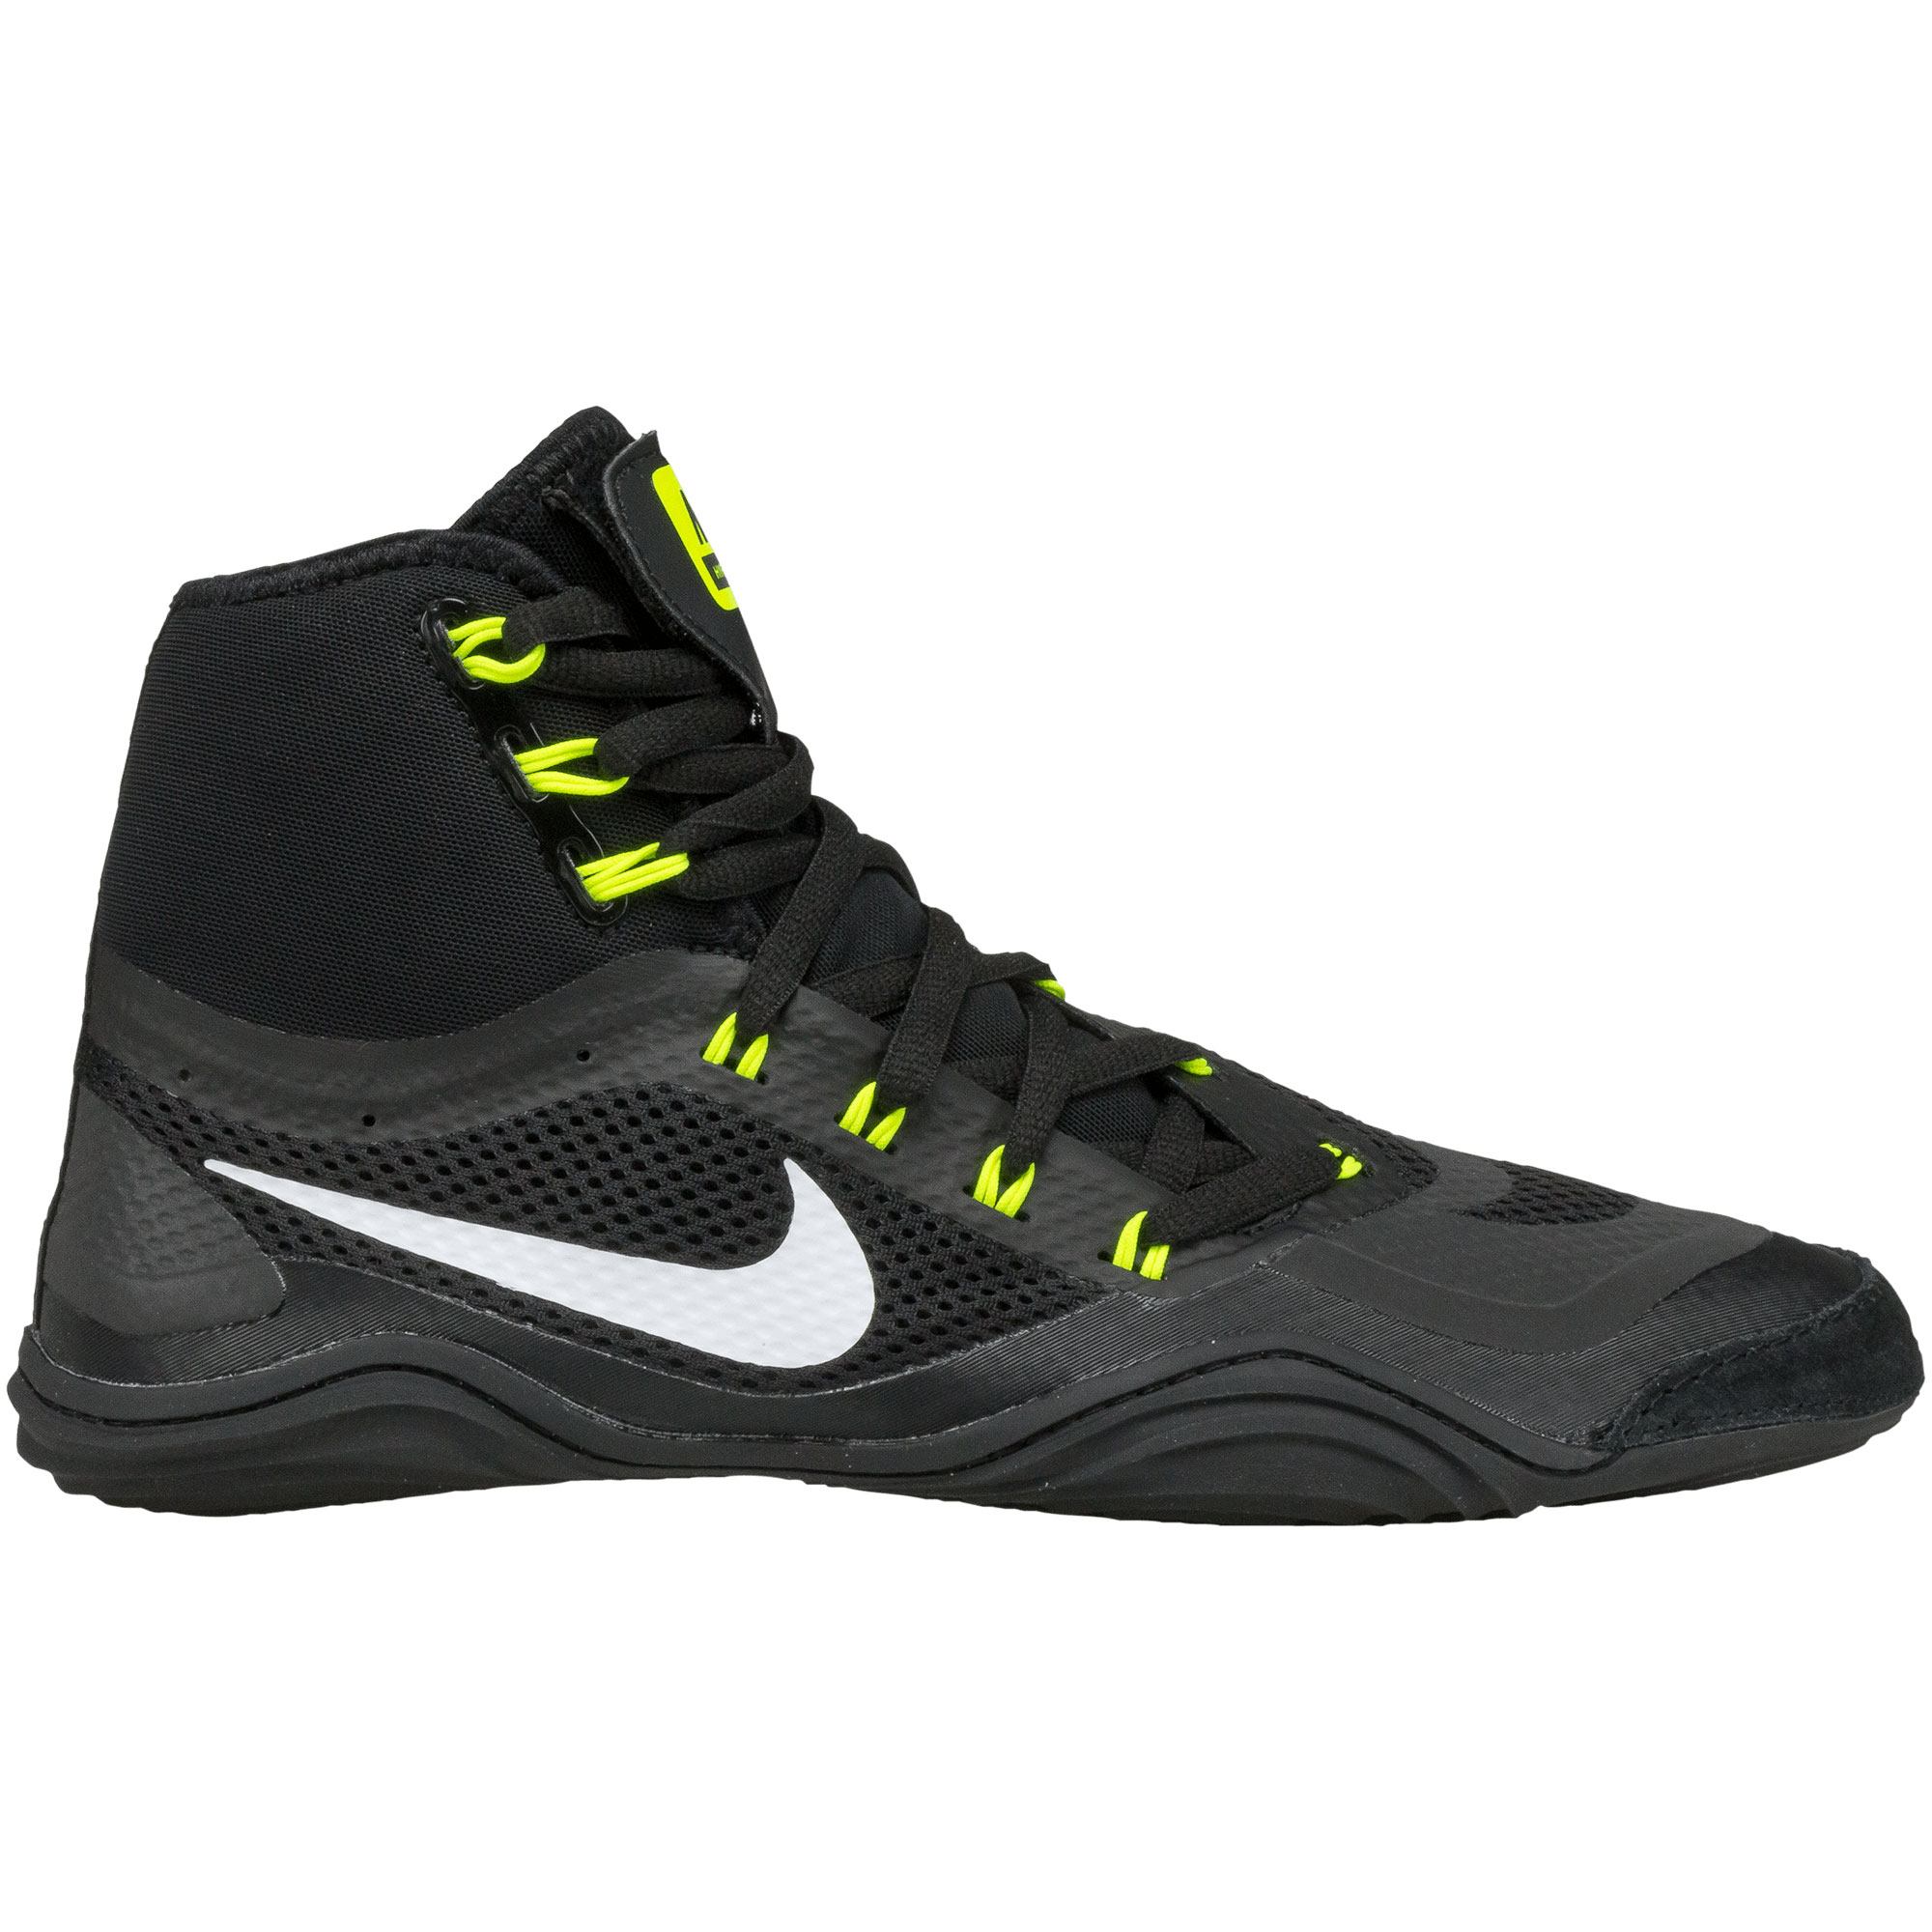 Cute Black and White Nike Logo - Wrestling Shoes | Free Shipping